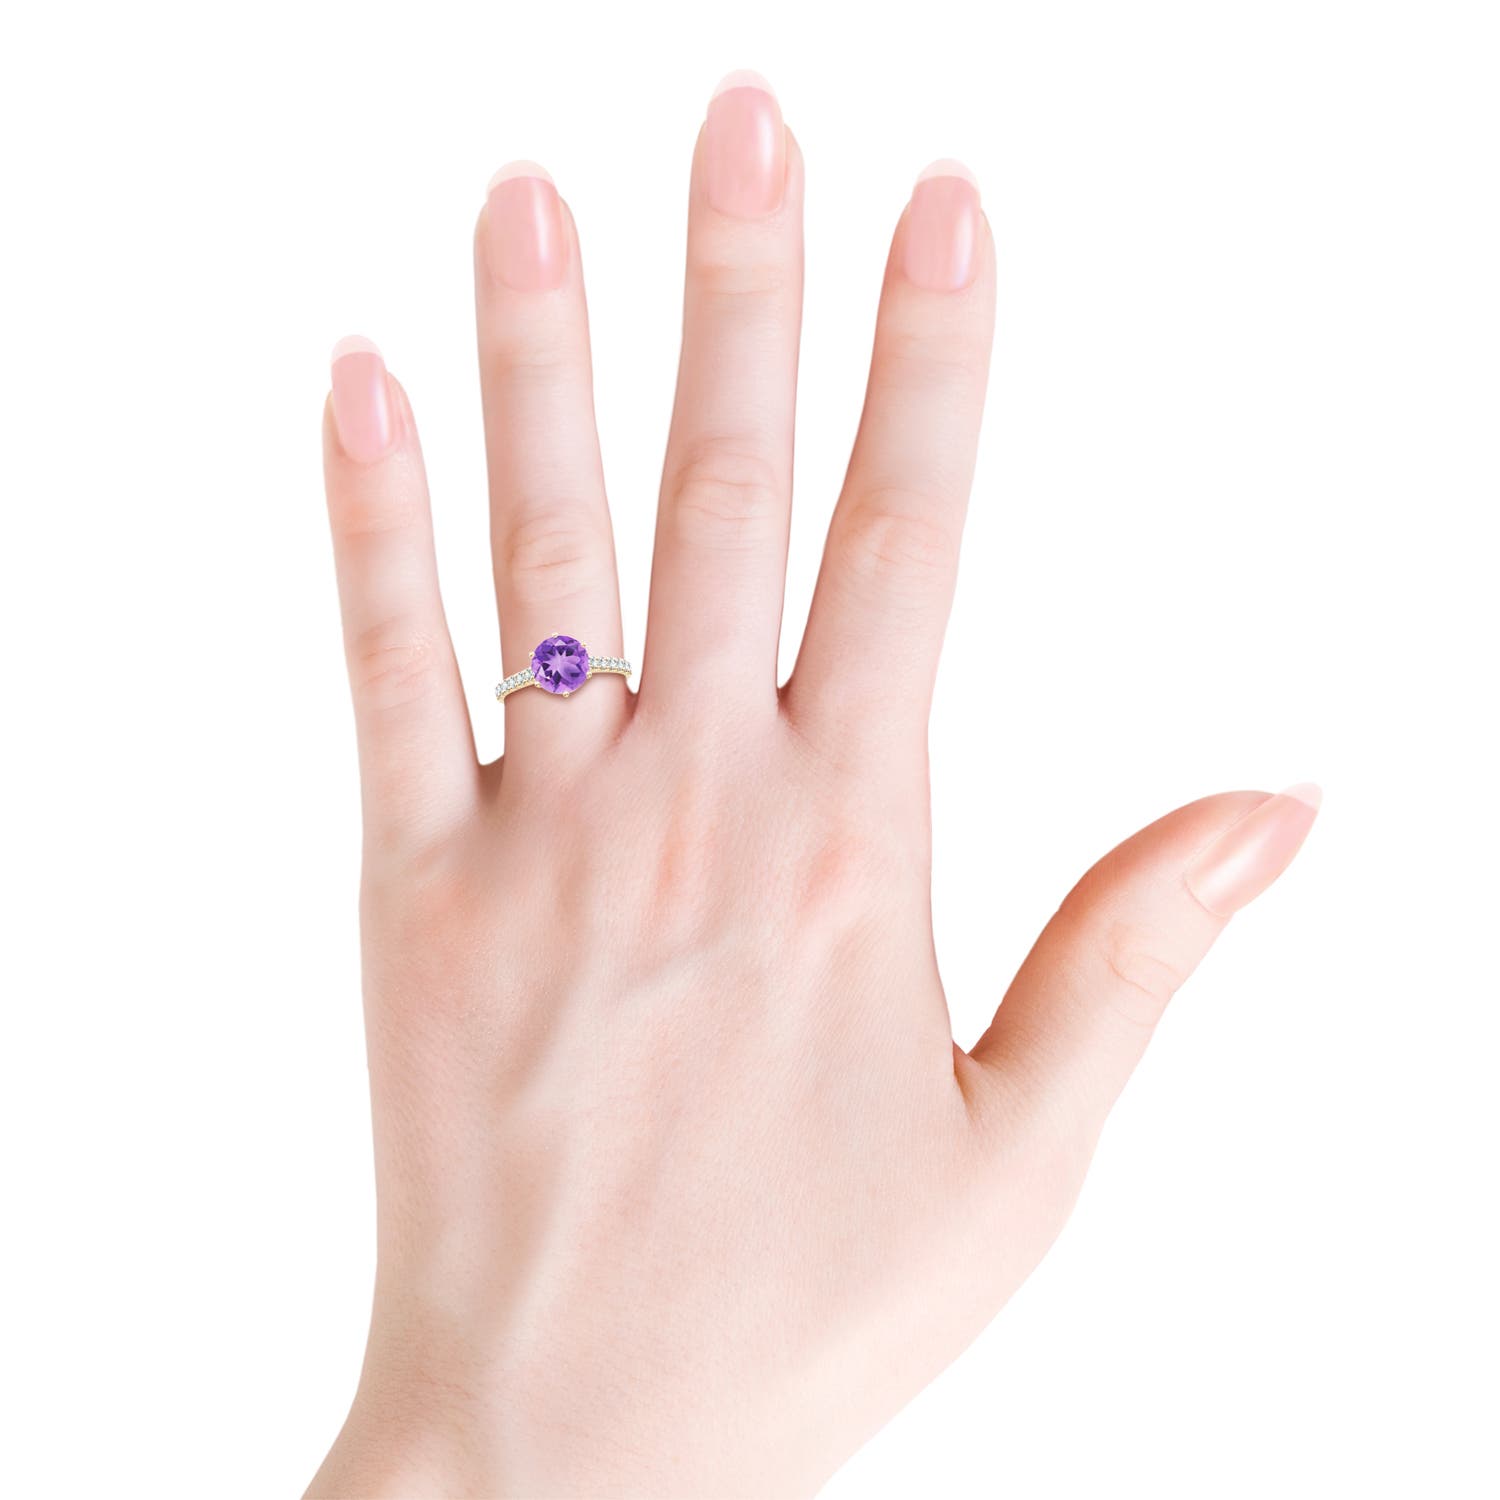 A - Amethyst / 2 CT / 14 KT Yellow Gold